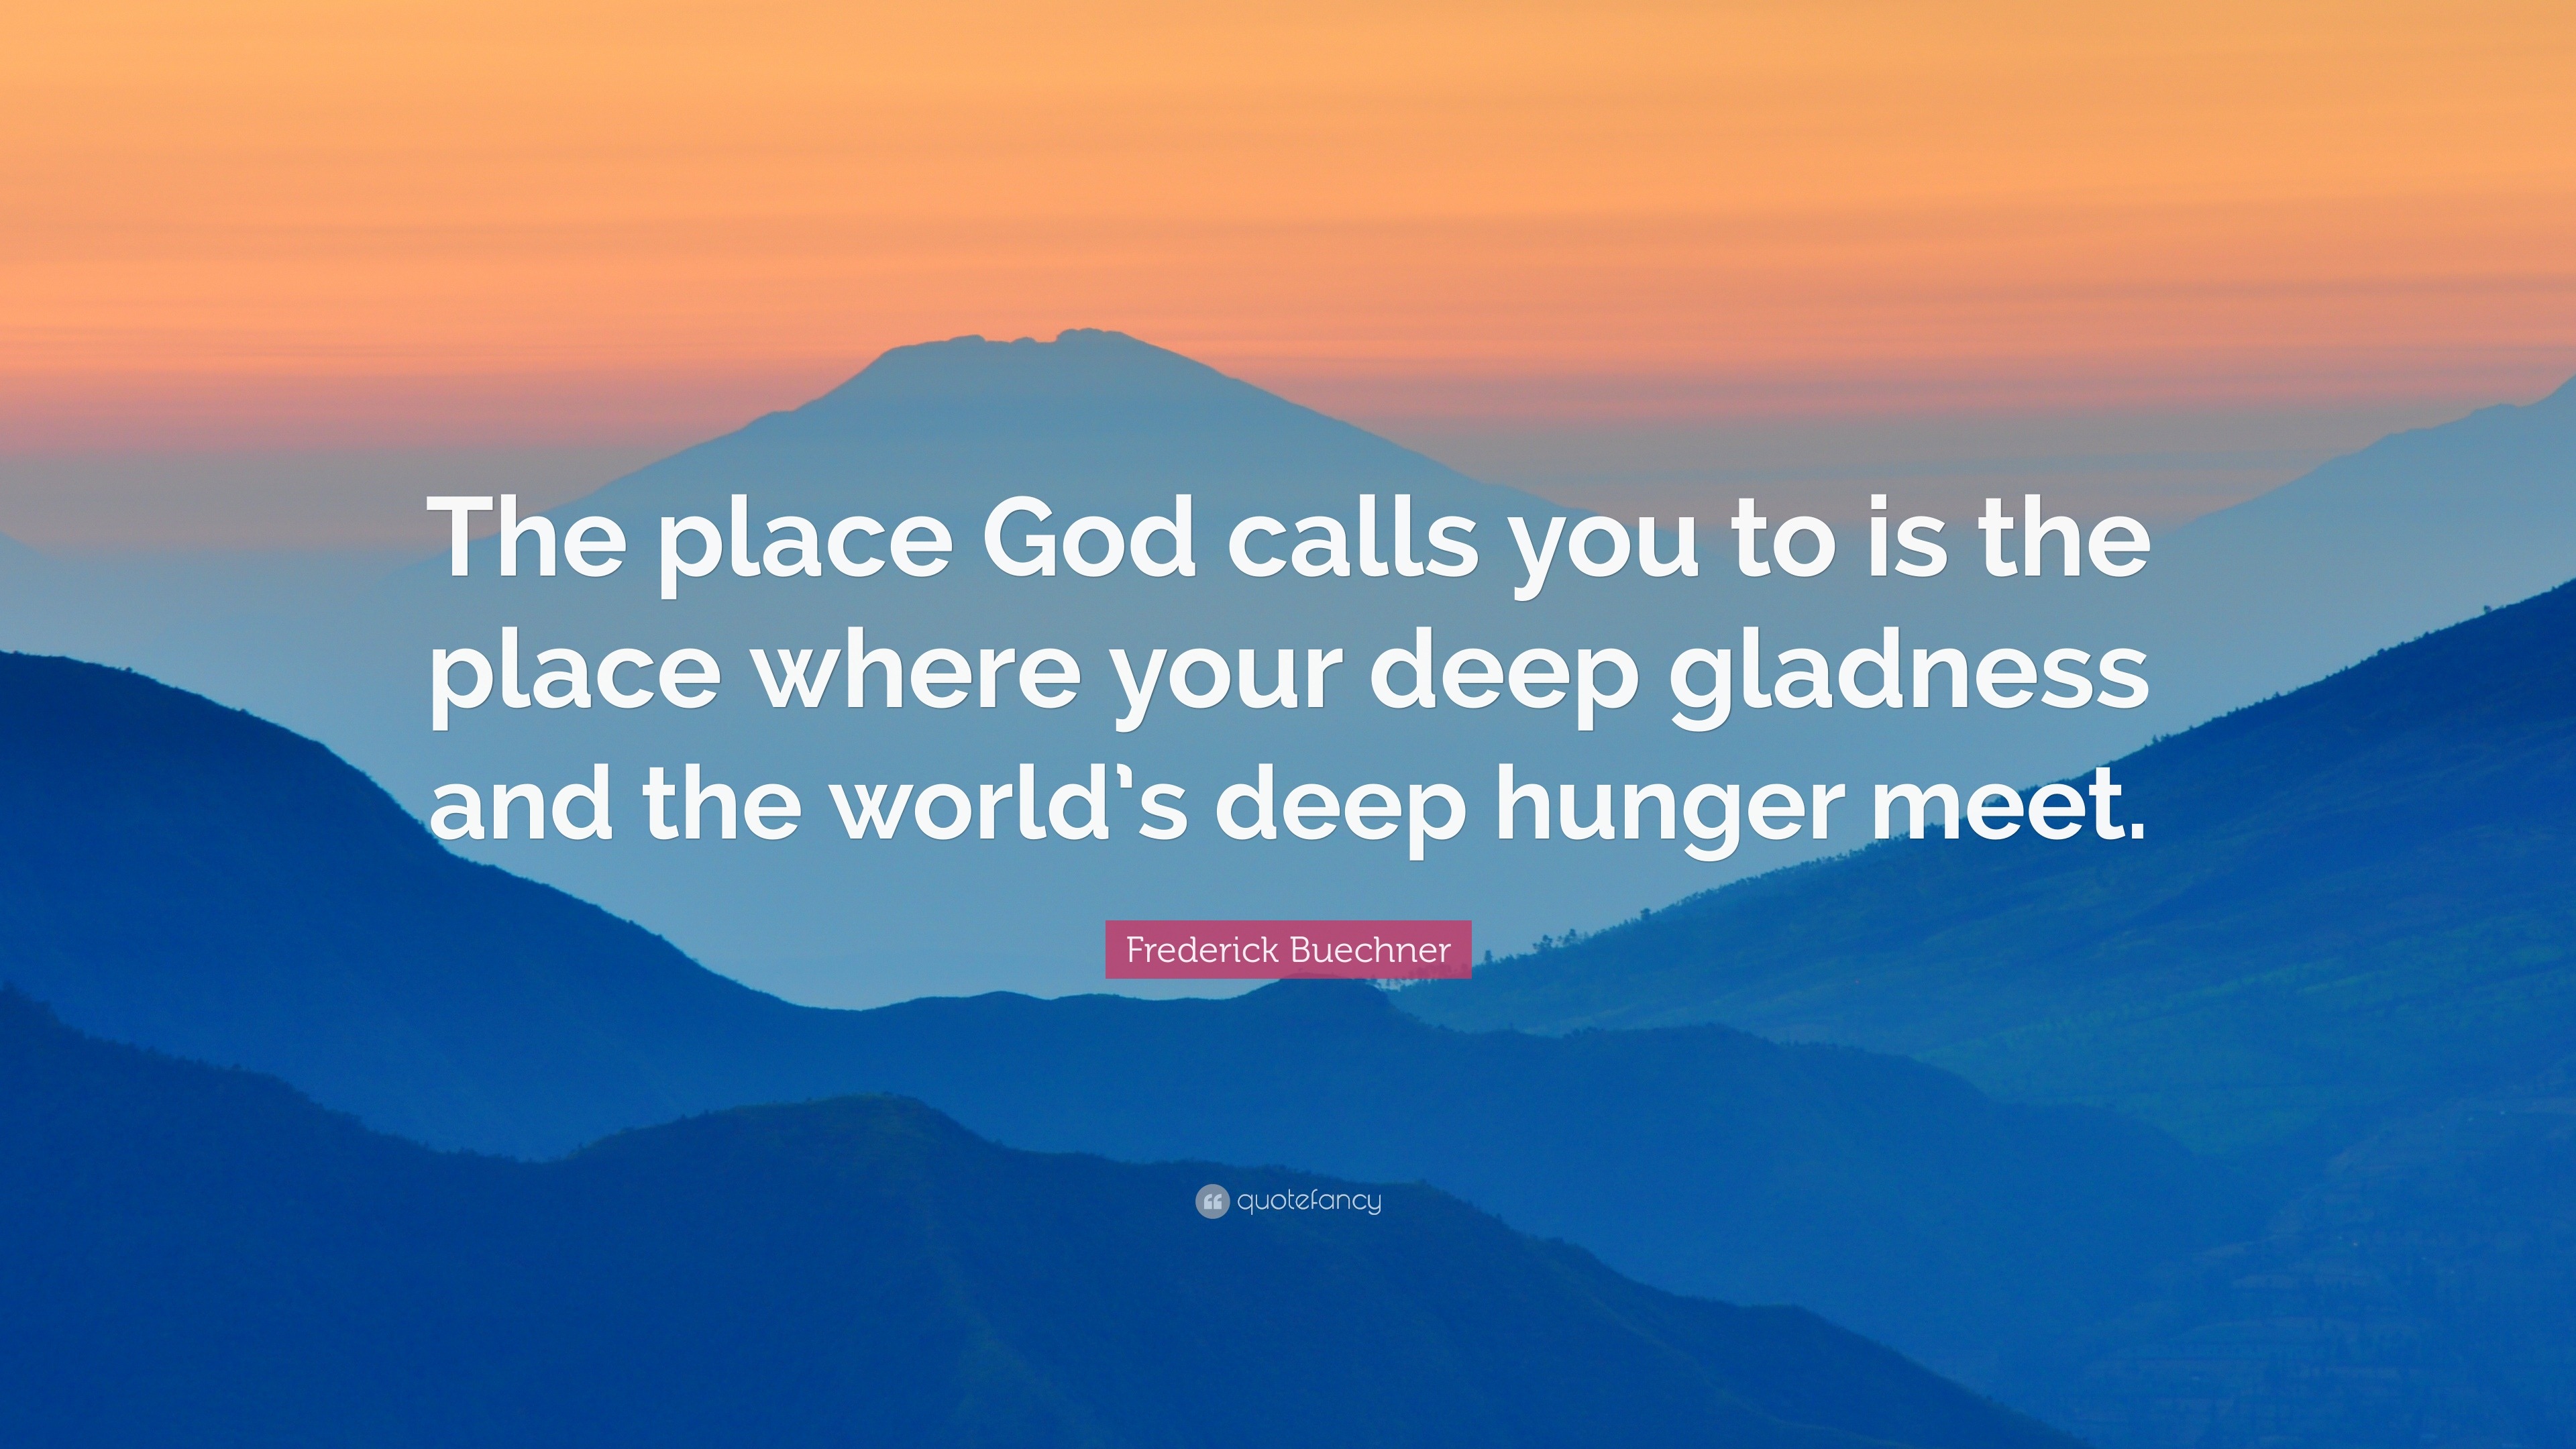 Frederick Buechner Quote: “The place God calls you to is the place